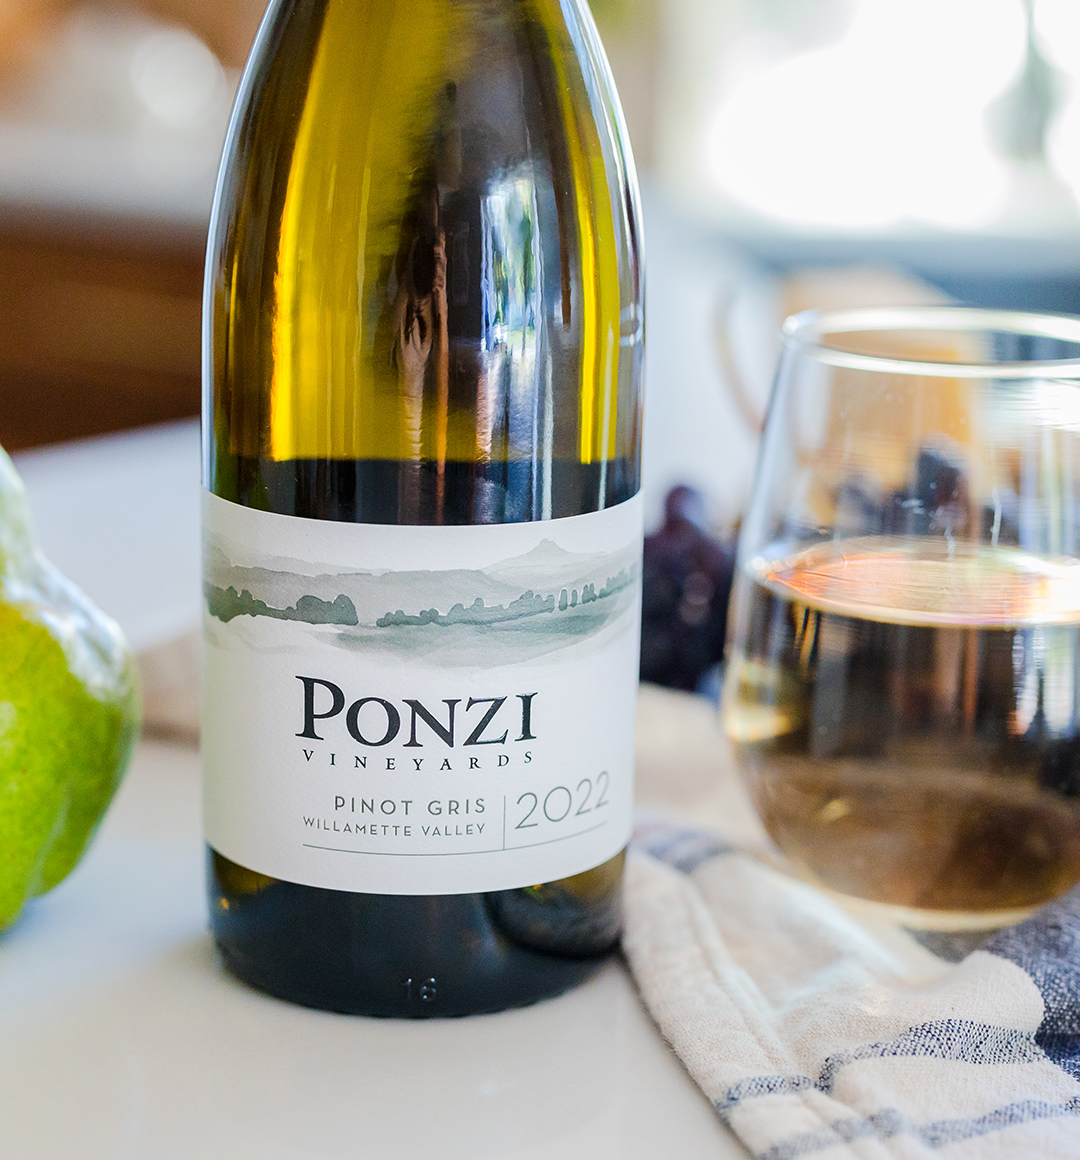 A cropped image of a bottle of white wine from Ponzi Vineyards on a tabletop next to a class of wine.